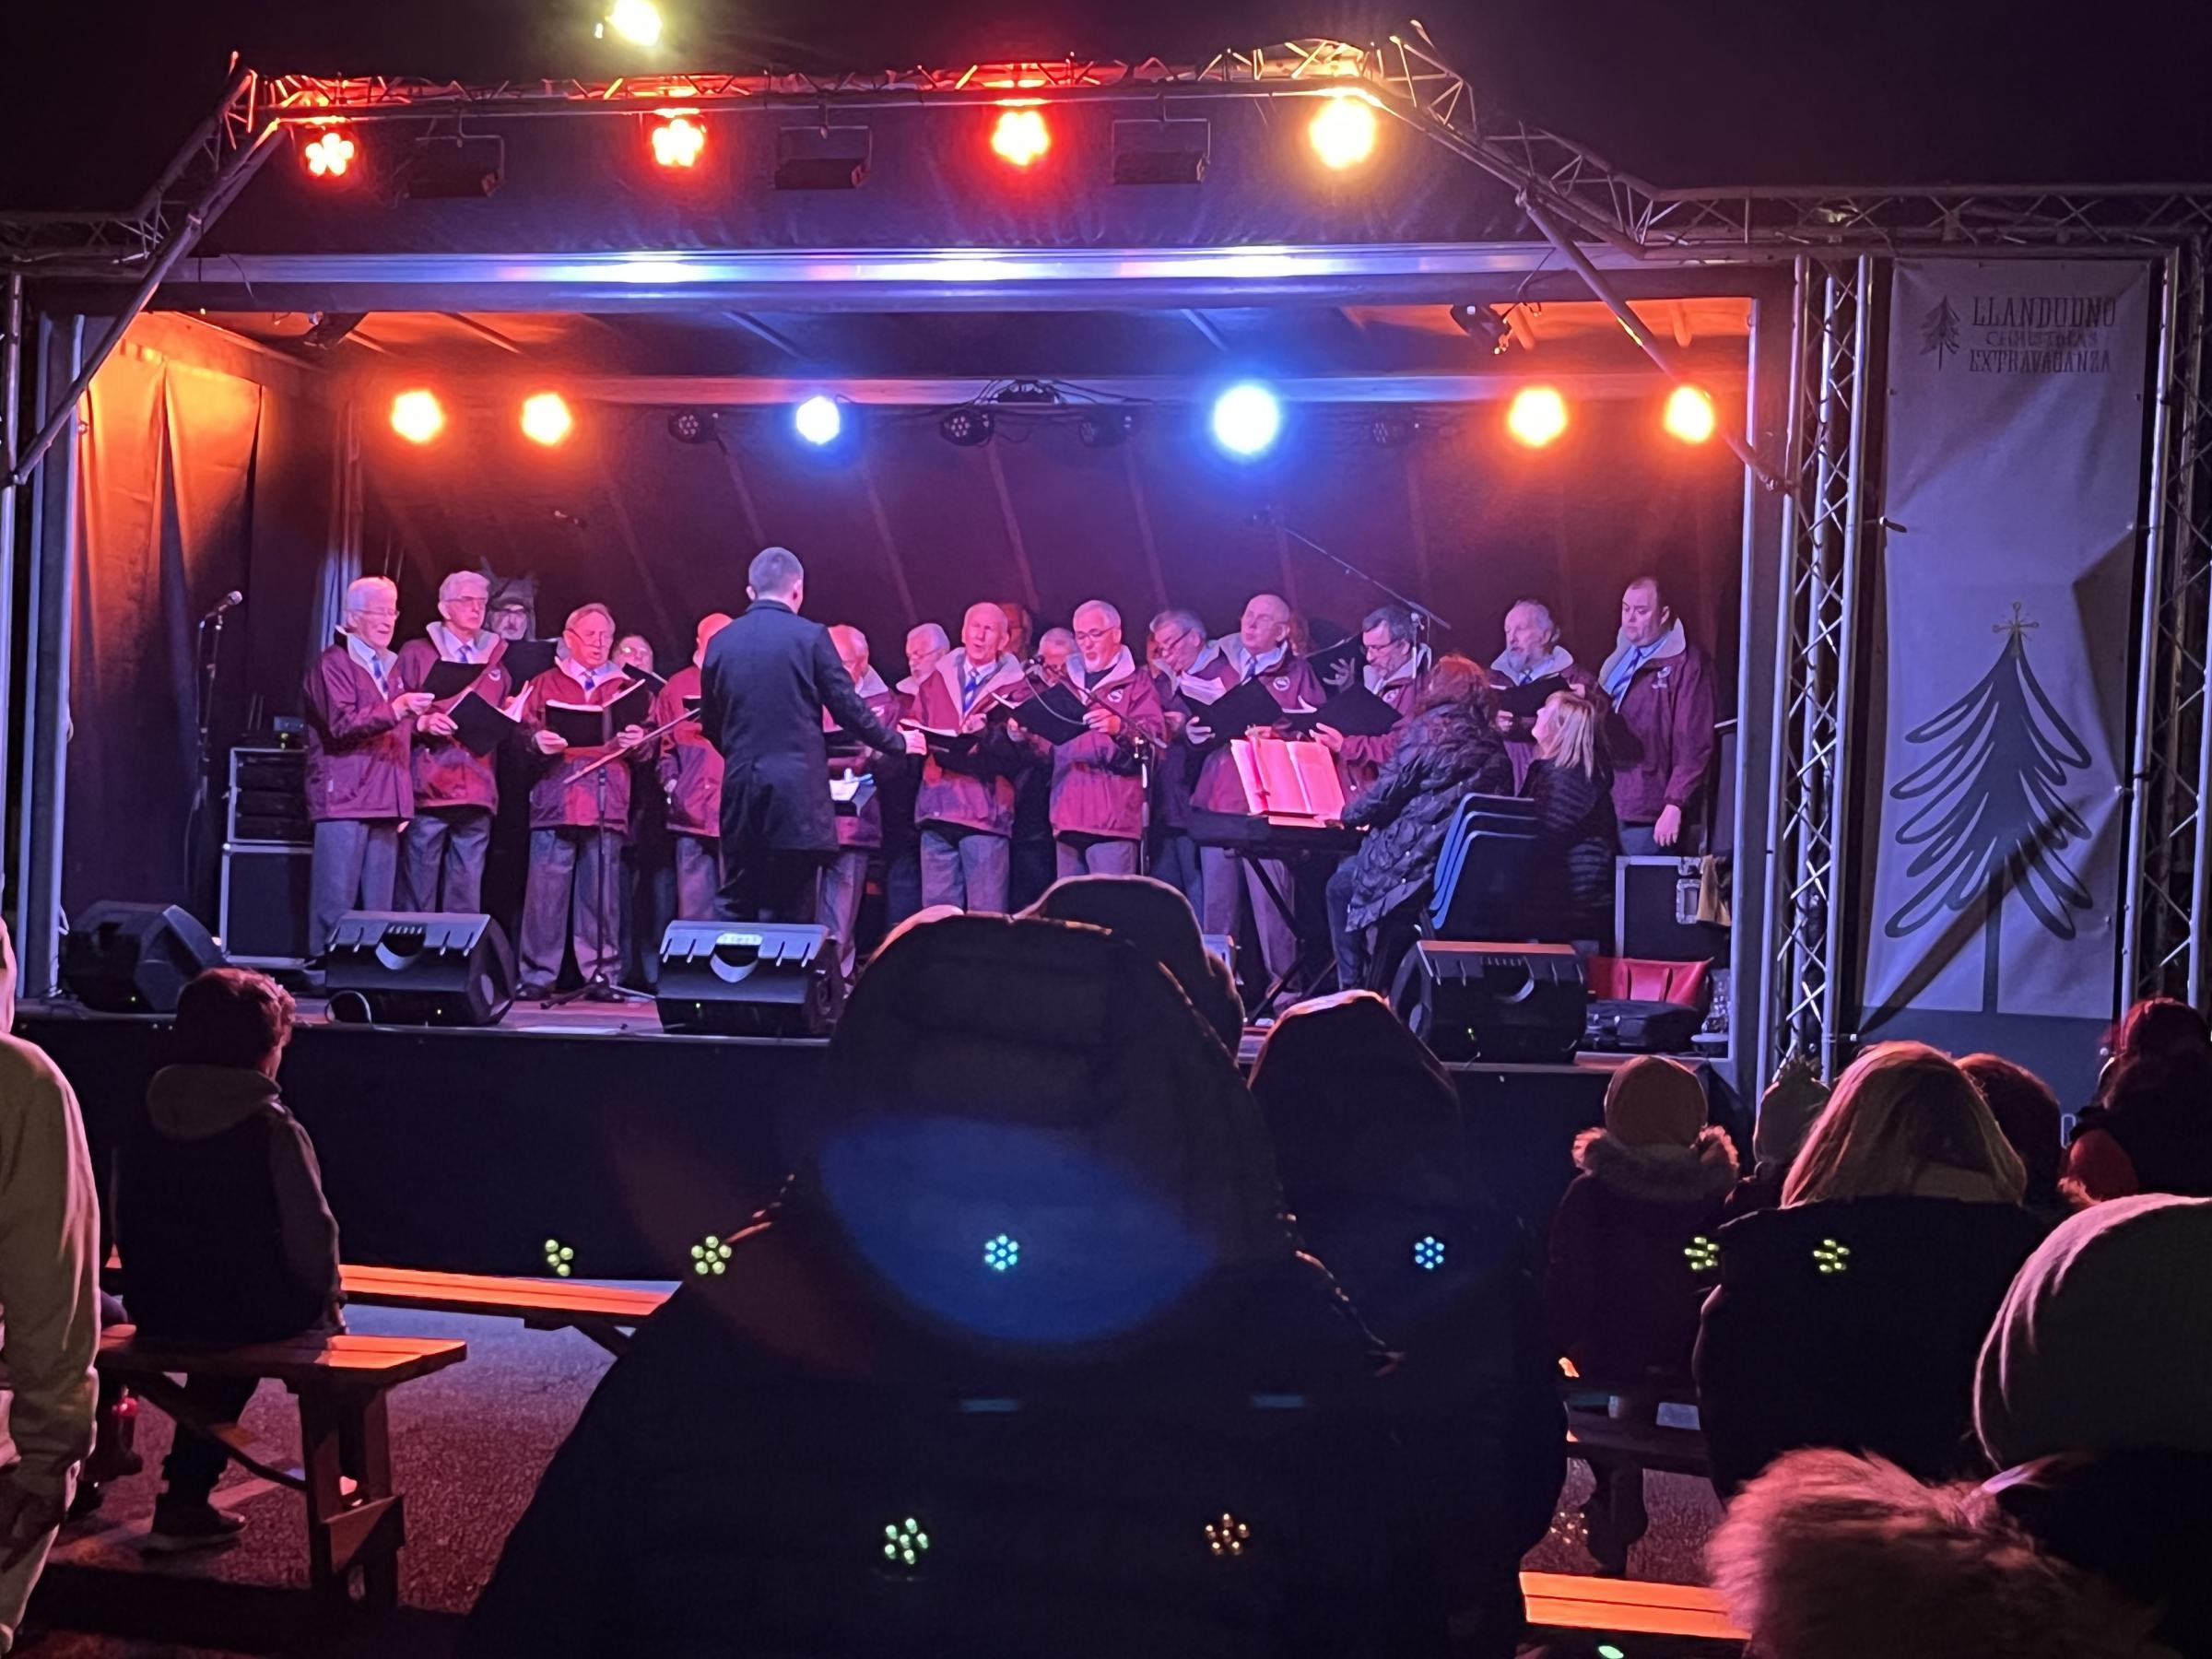 Maelgwn Male Voice Choir on stage. Picture: Suzanne Kendrick